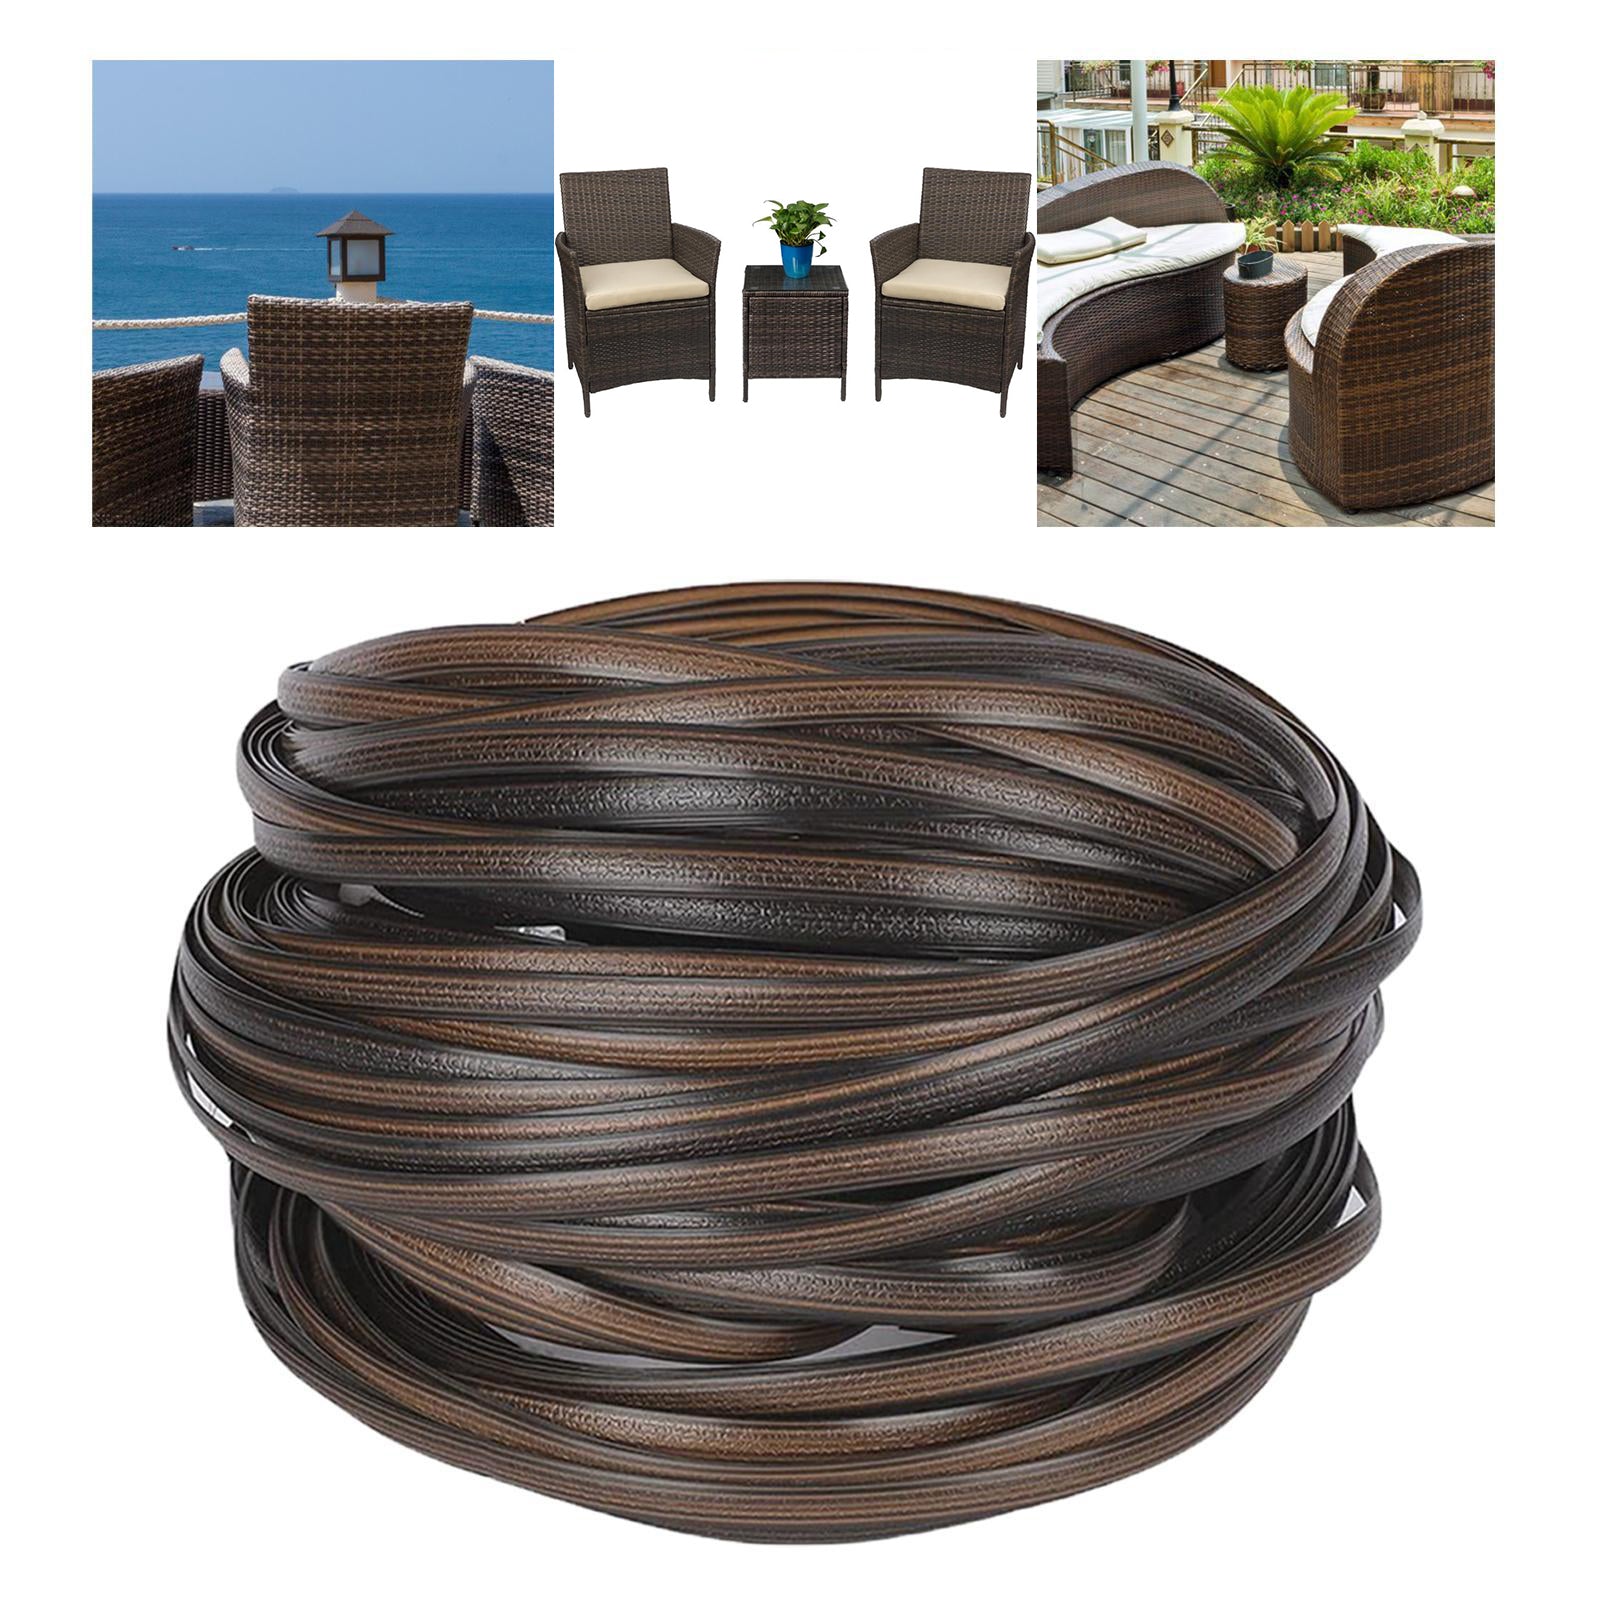 Outdoor Patio Garden Furniture Repair Kit with Tools and 500g Wicker PE Rattan